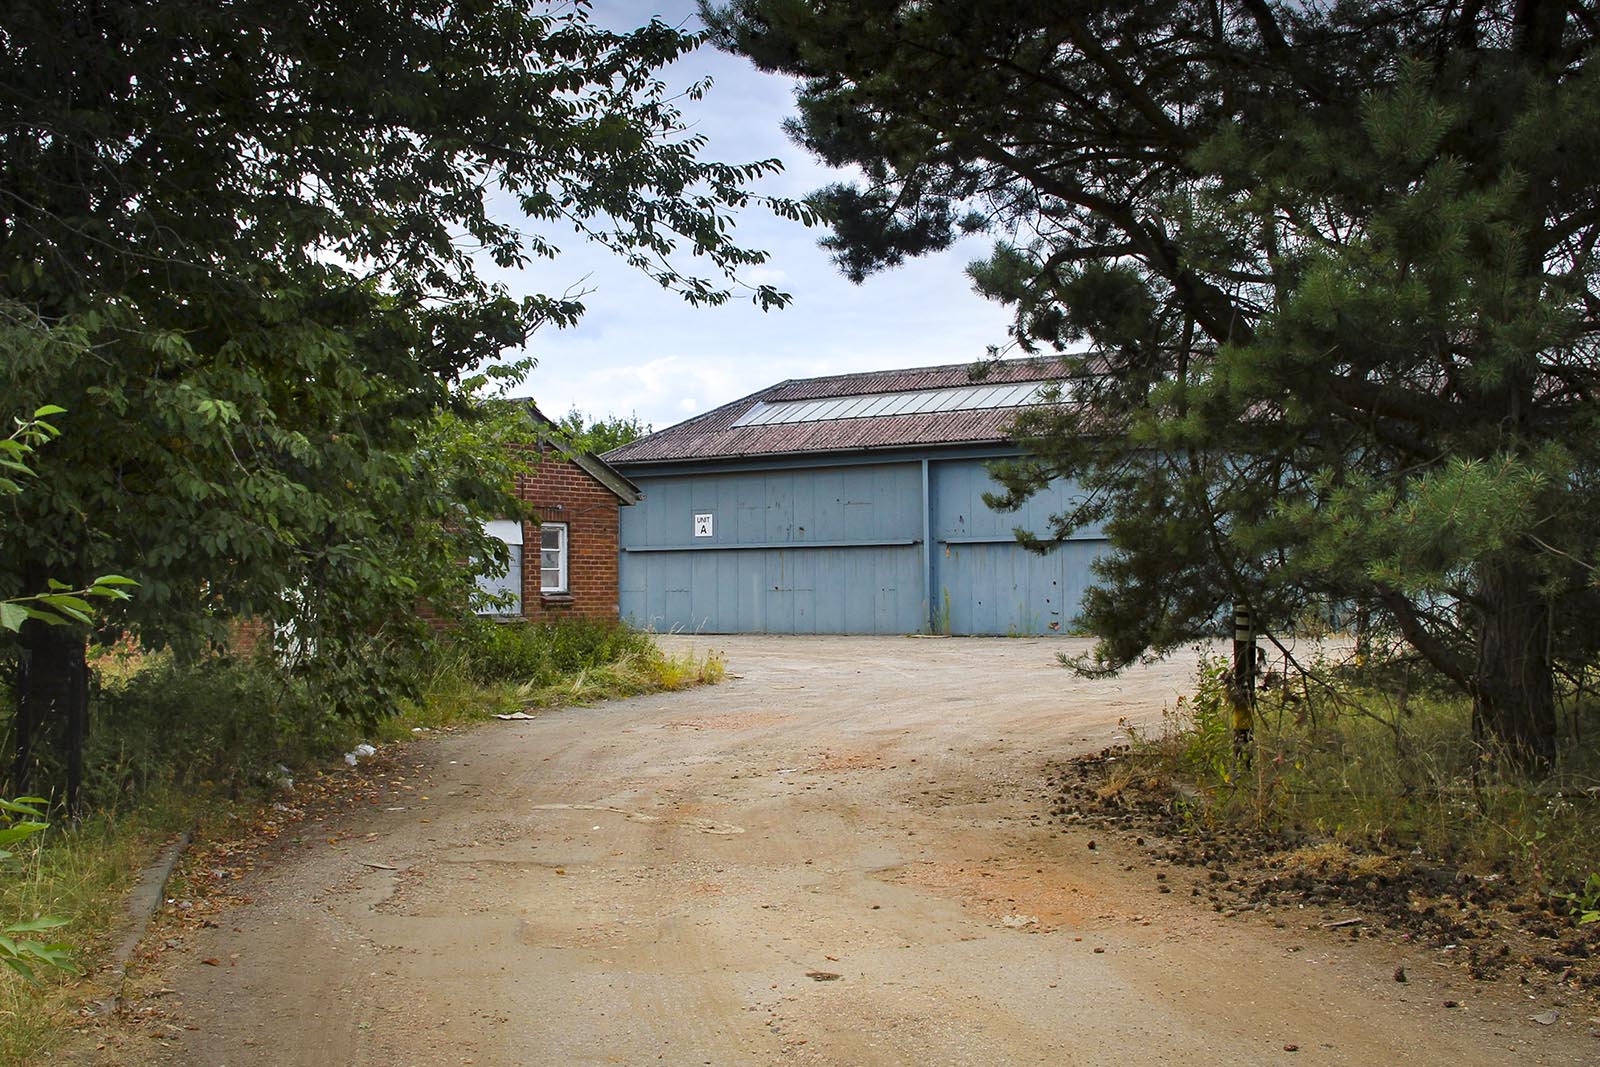 Example Brownfield Site